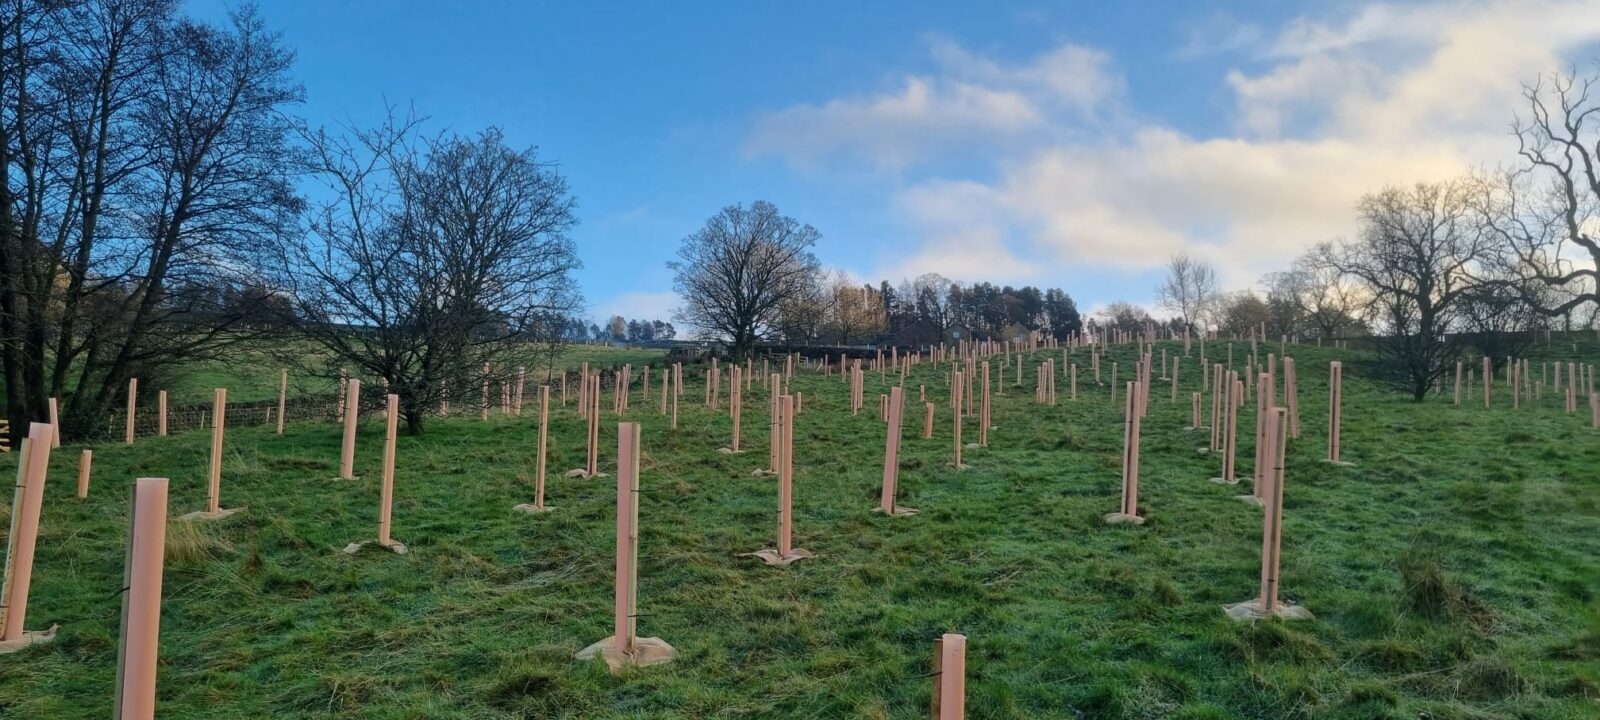 Tree planting in a field with blue sky